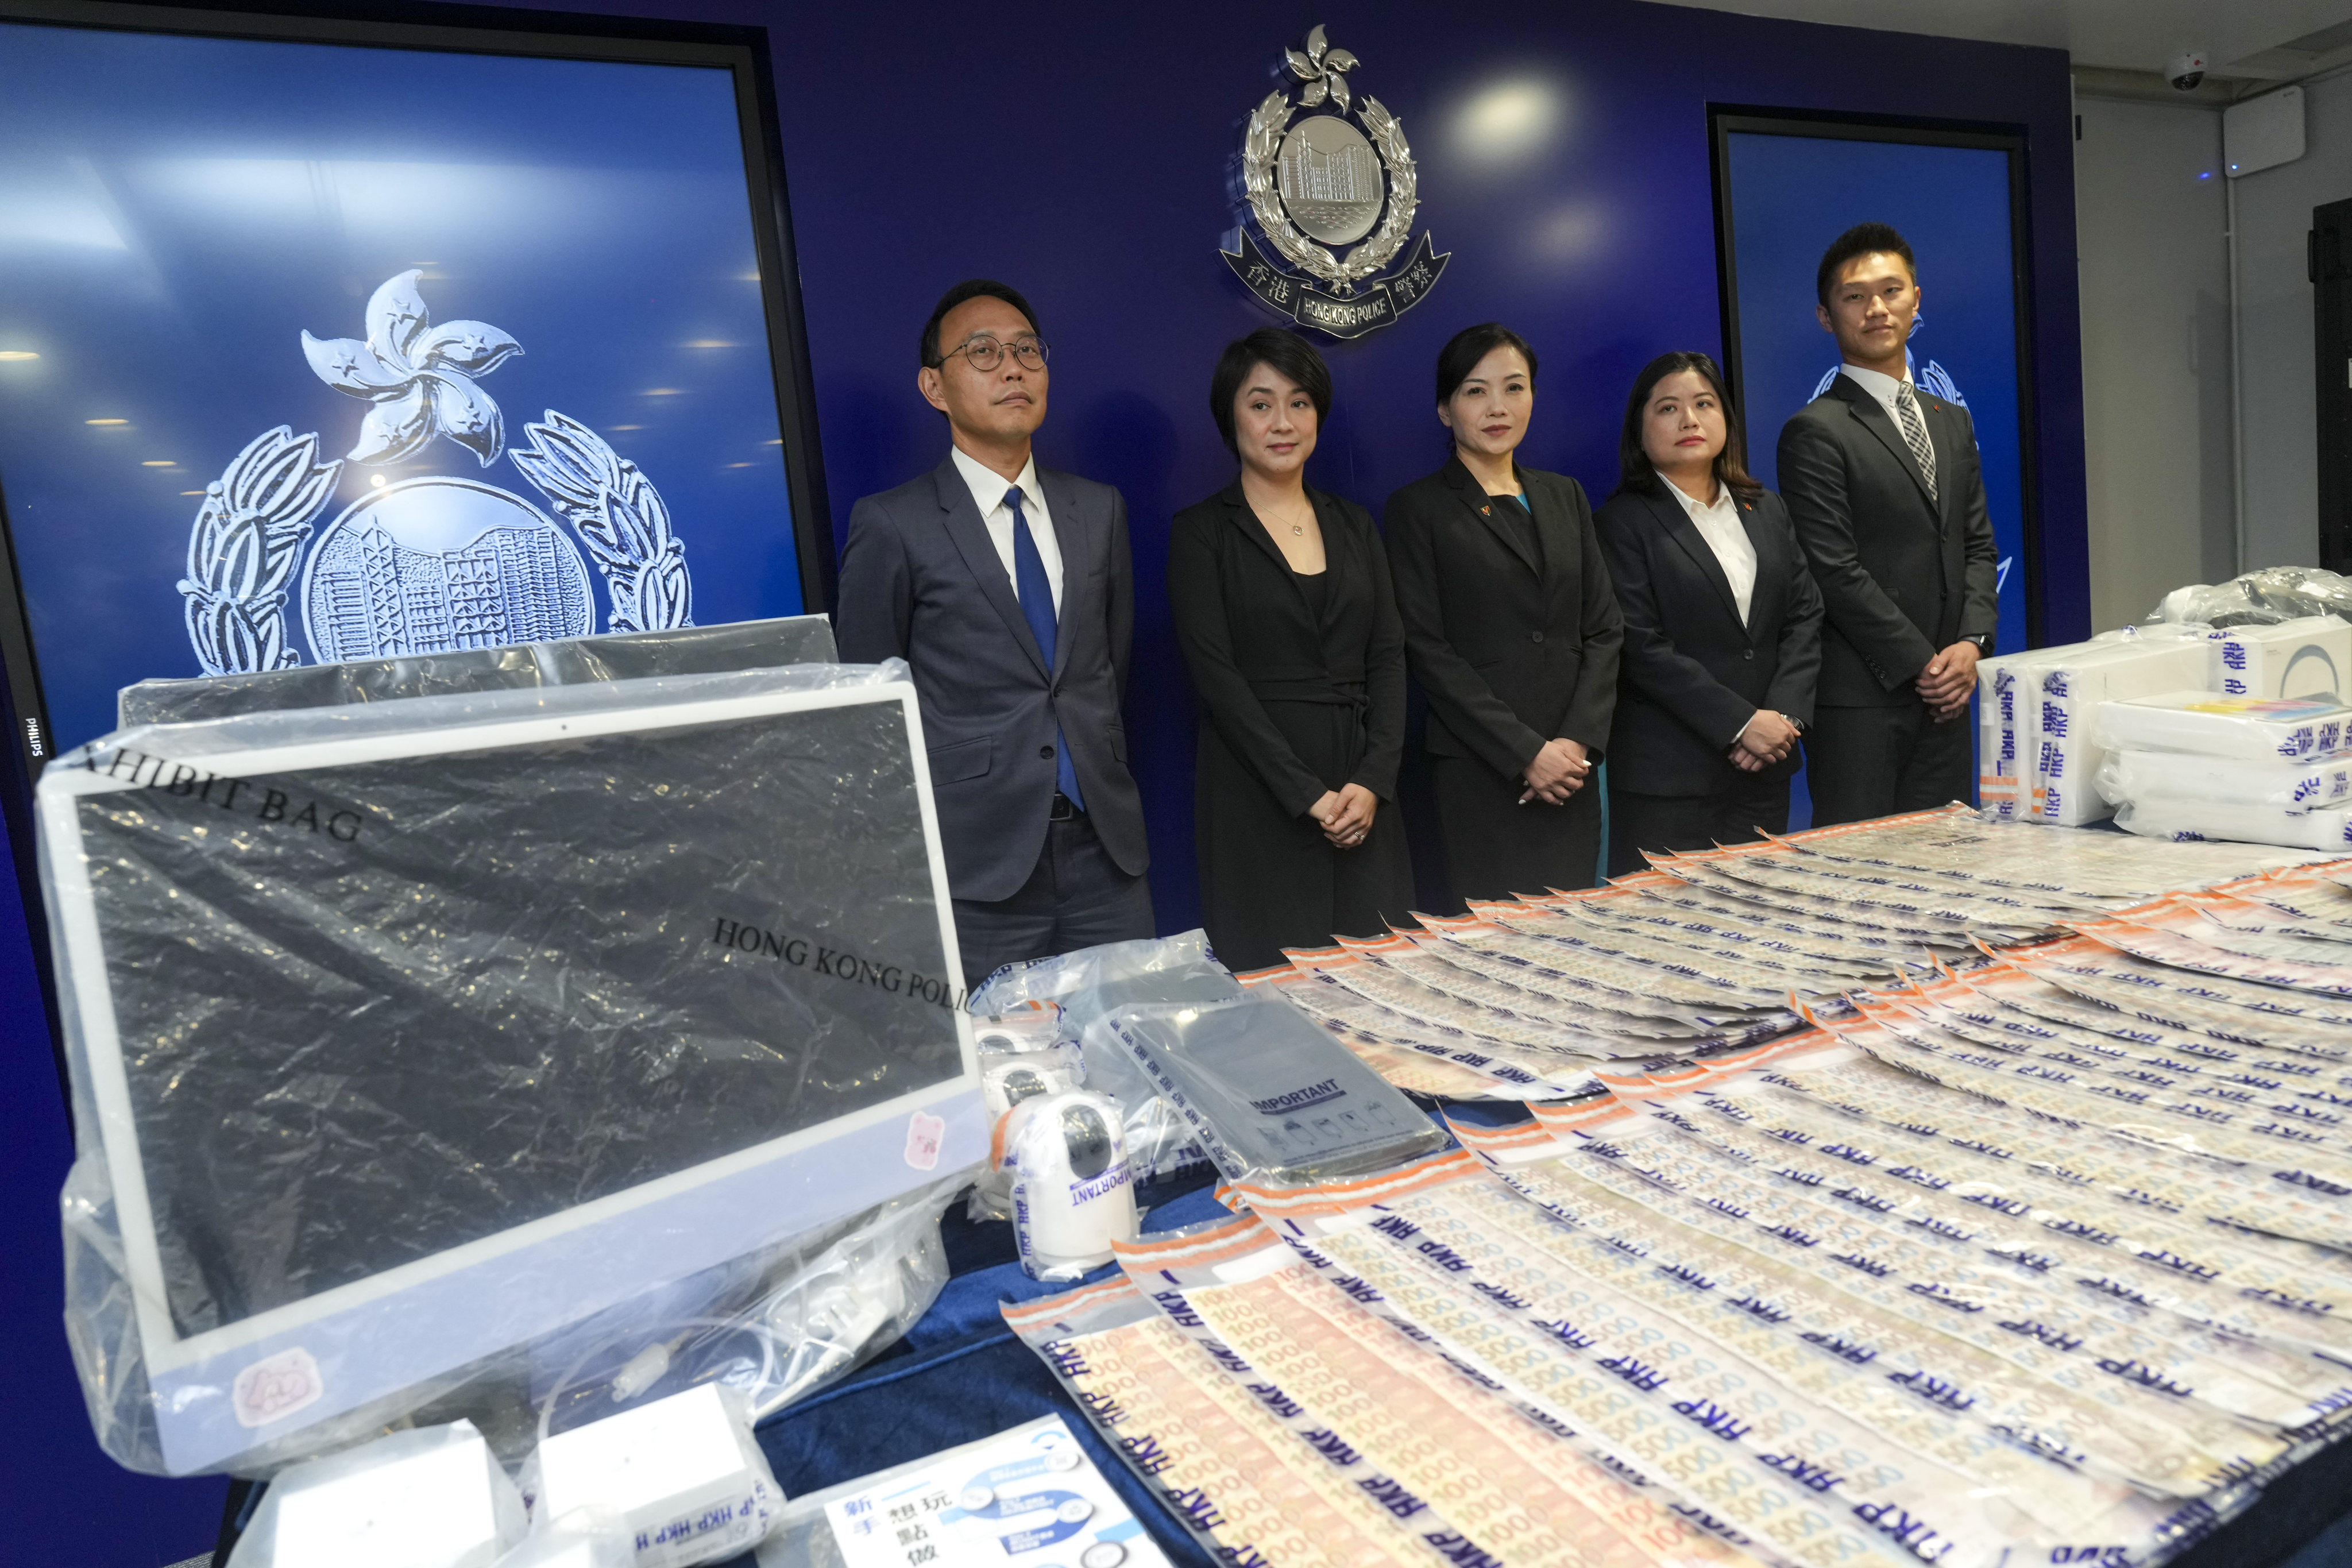 Hong Kong authorities display evidence seized earlier this week as part of the investigation. Photo: Sam Tsang